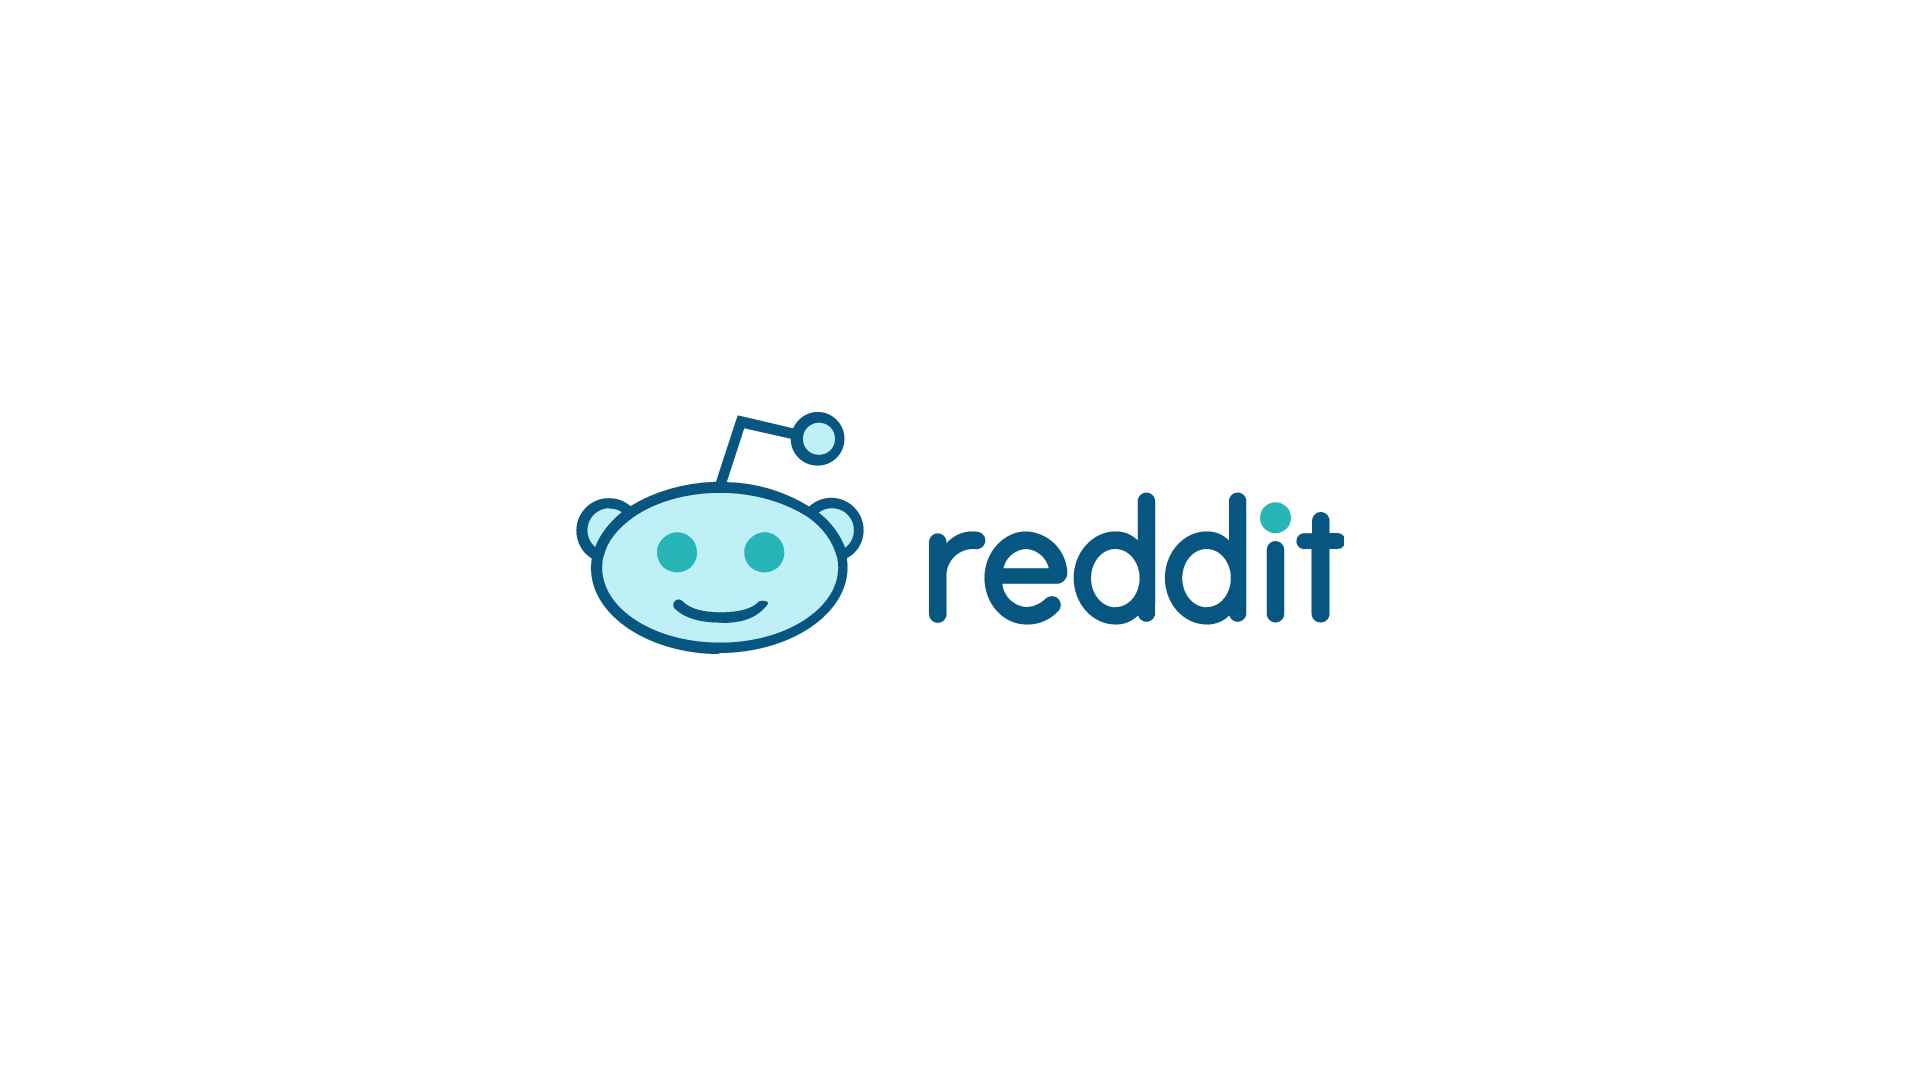 Are there any official Reddit apps for mobile devices?